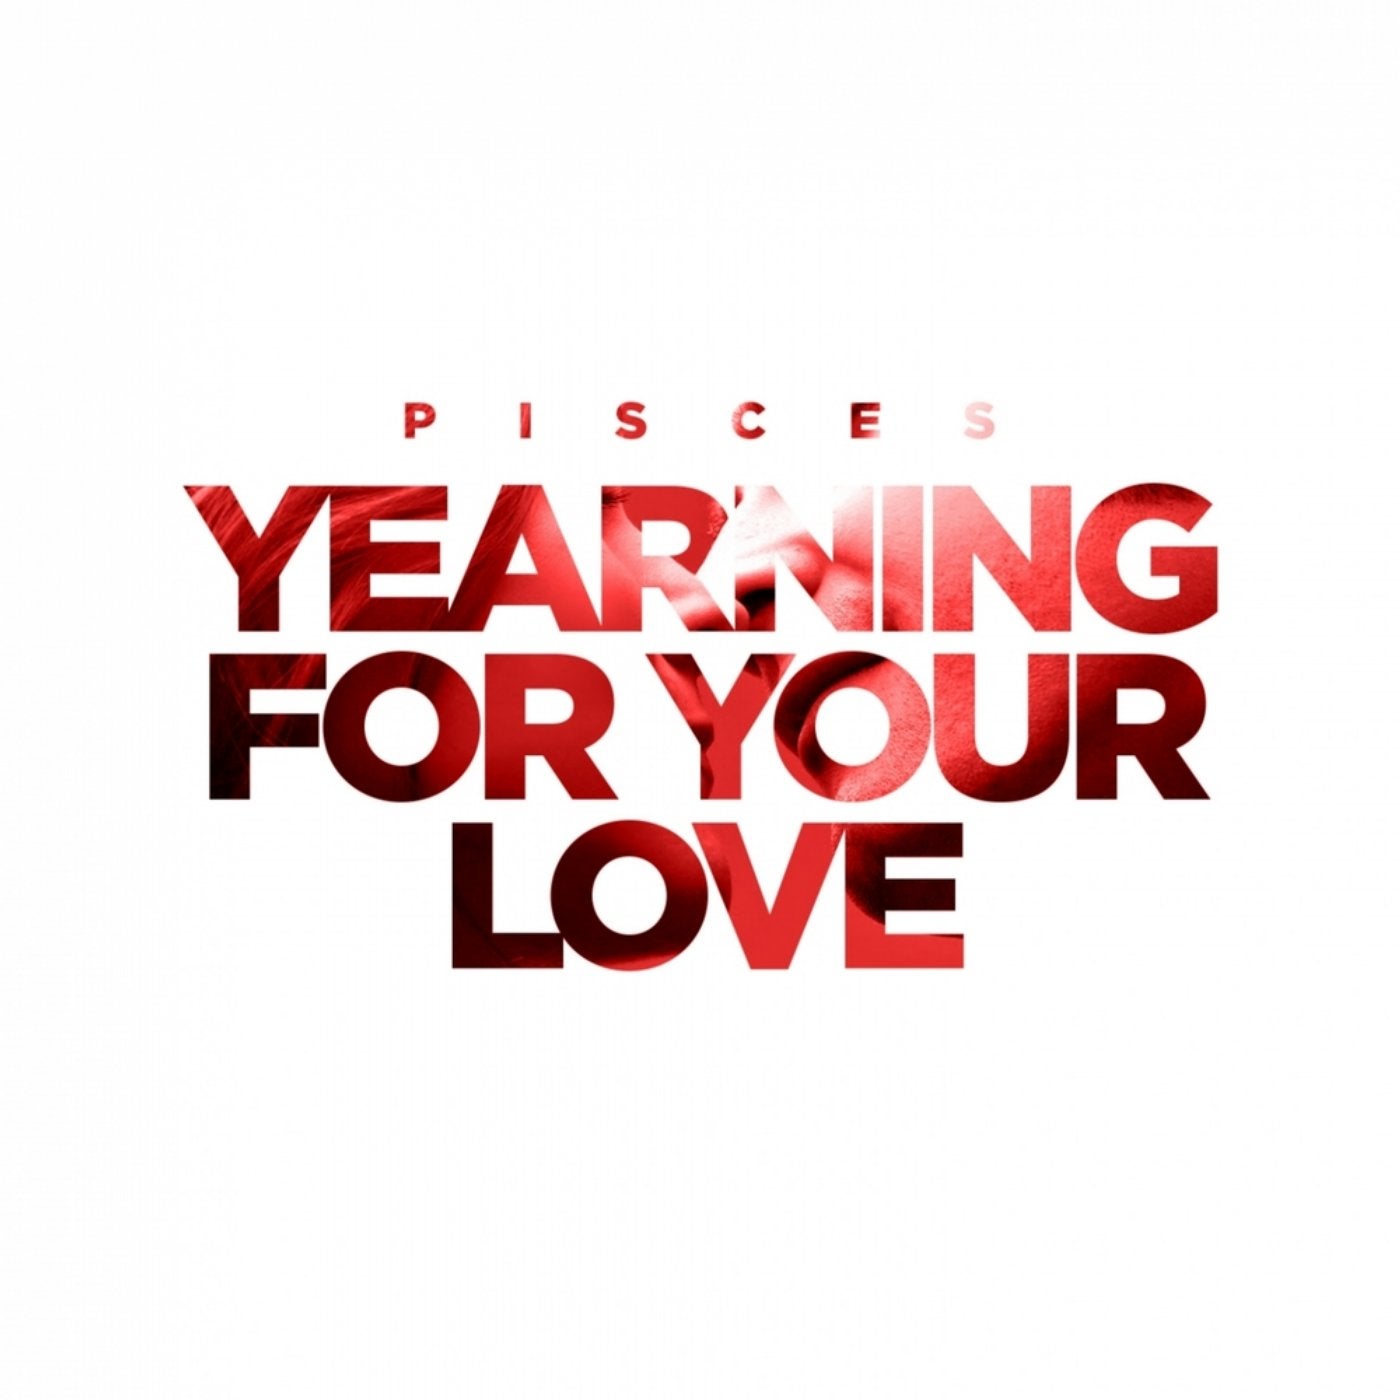 Yearning For Your Love